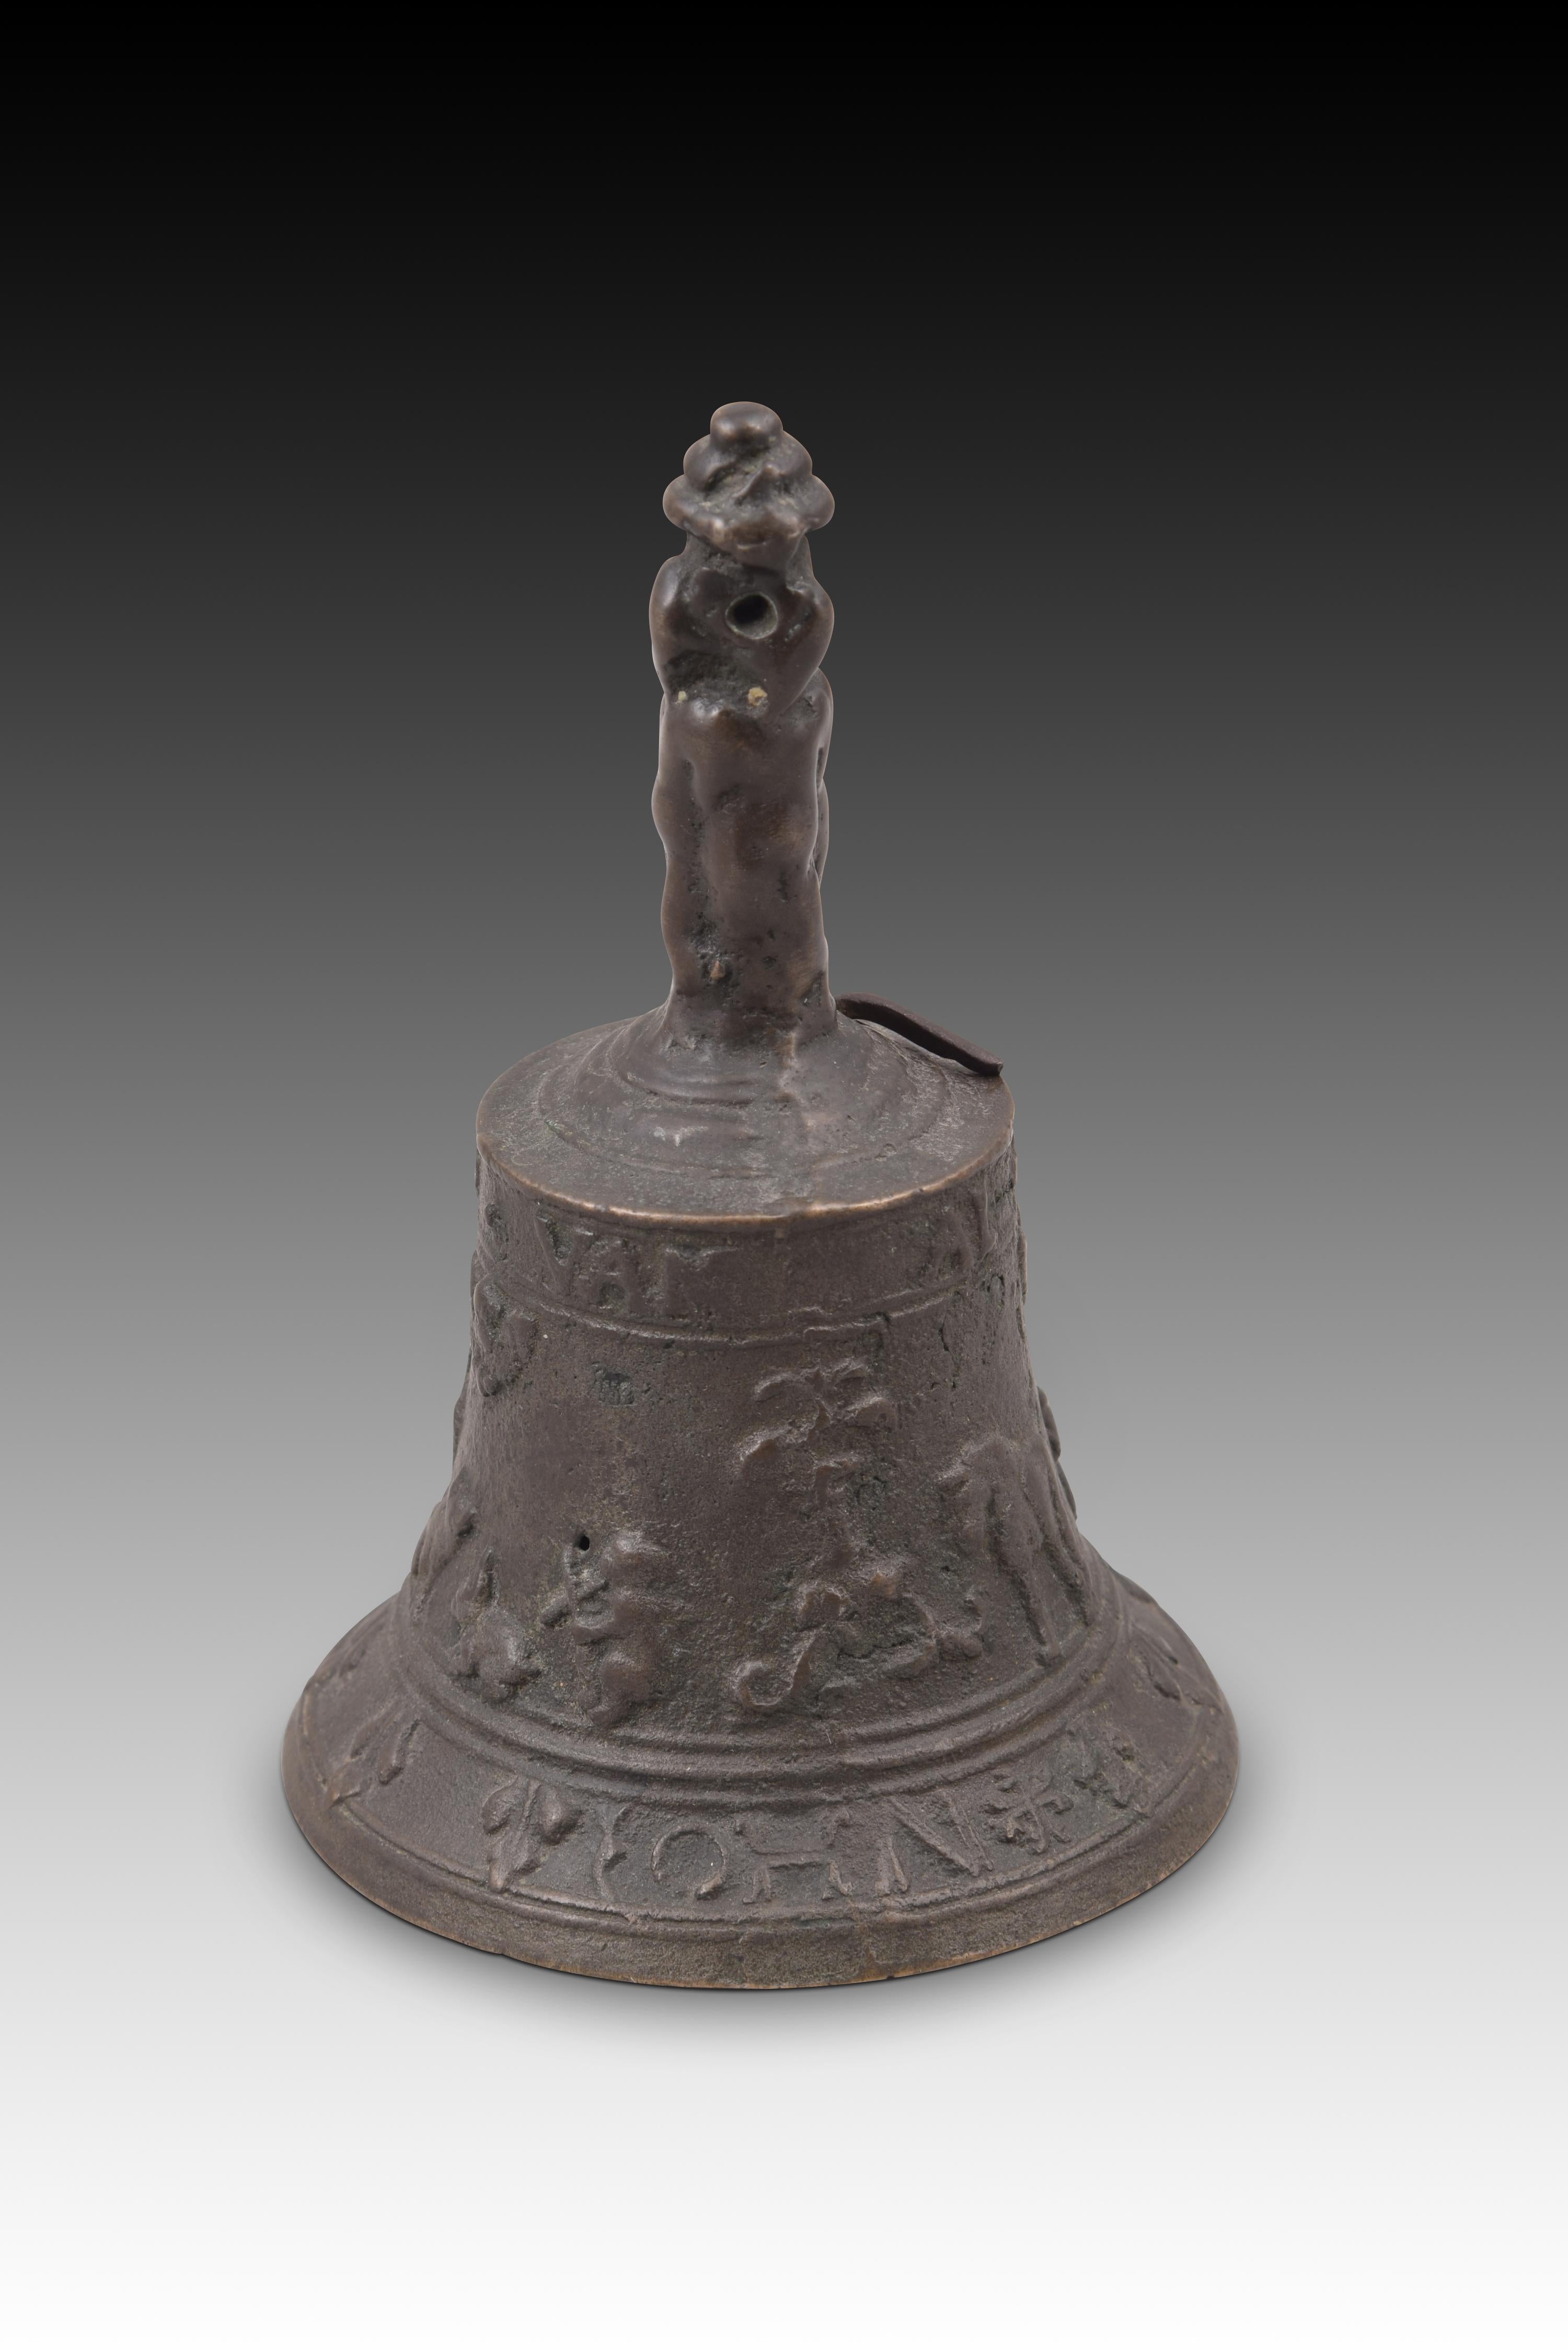 Flemish bell, “from Mechelen”. Bronze. Century XVI. 
Hand bell made of bronze, with clapper, decorated on the outside with a series of reliefs. At the base, and enhanced by two bands, are a series of plant elements and Latin capital letters; the